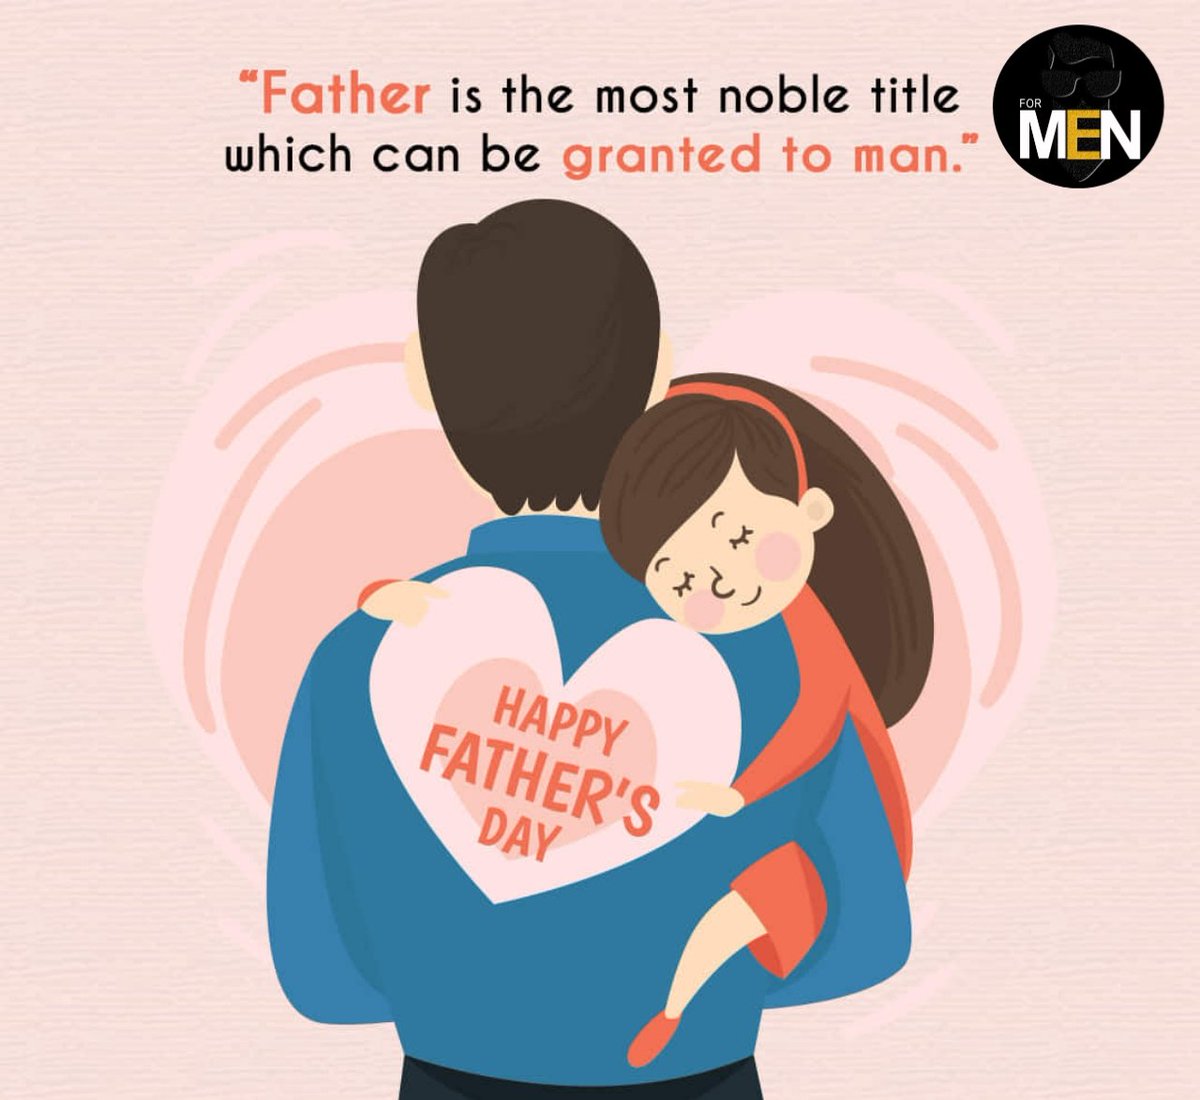 TO ALL THE FATHERS WHO WORK HARD TO GIVE THEIR FAMILY A GOOD LIFE BUT CAN'T EXPRESS THEIR LOVE BY SAYING IT OFTEN, 
HAPPY FATHER'S DAY ❤️💐

#formenindia #MenToo #india #mensrights #MensRightsActivist #FathersDay #fatherhood